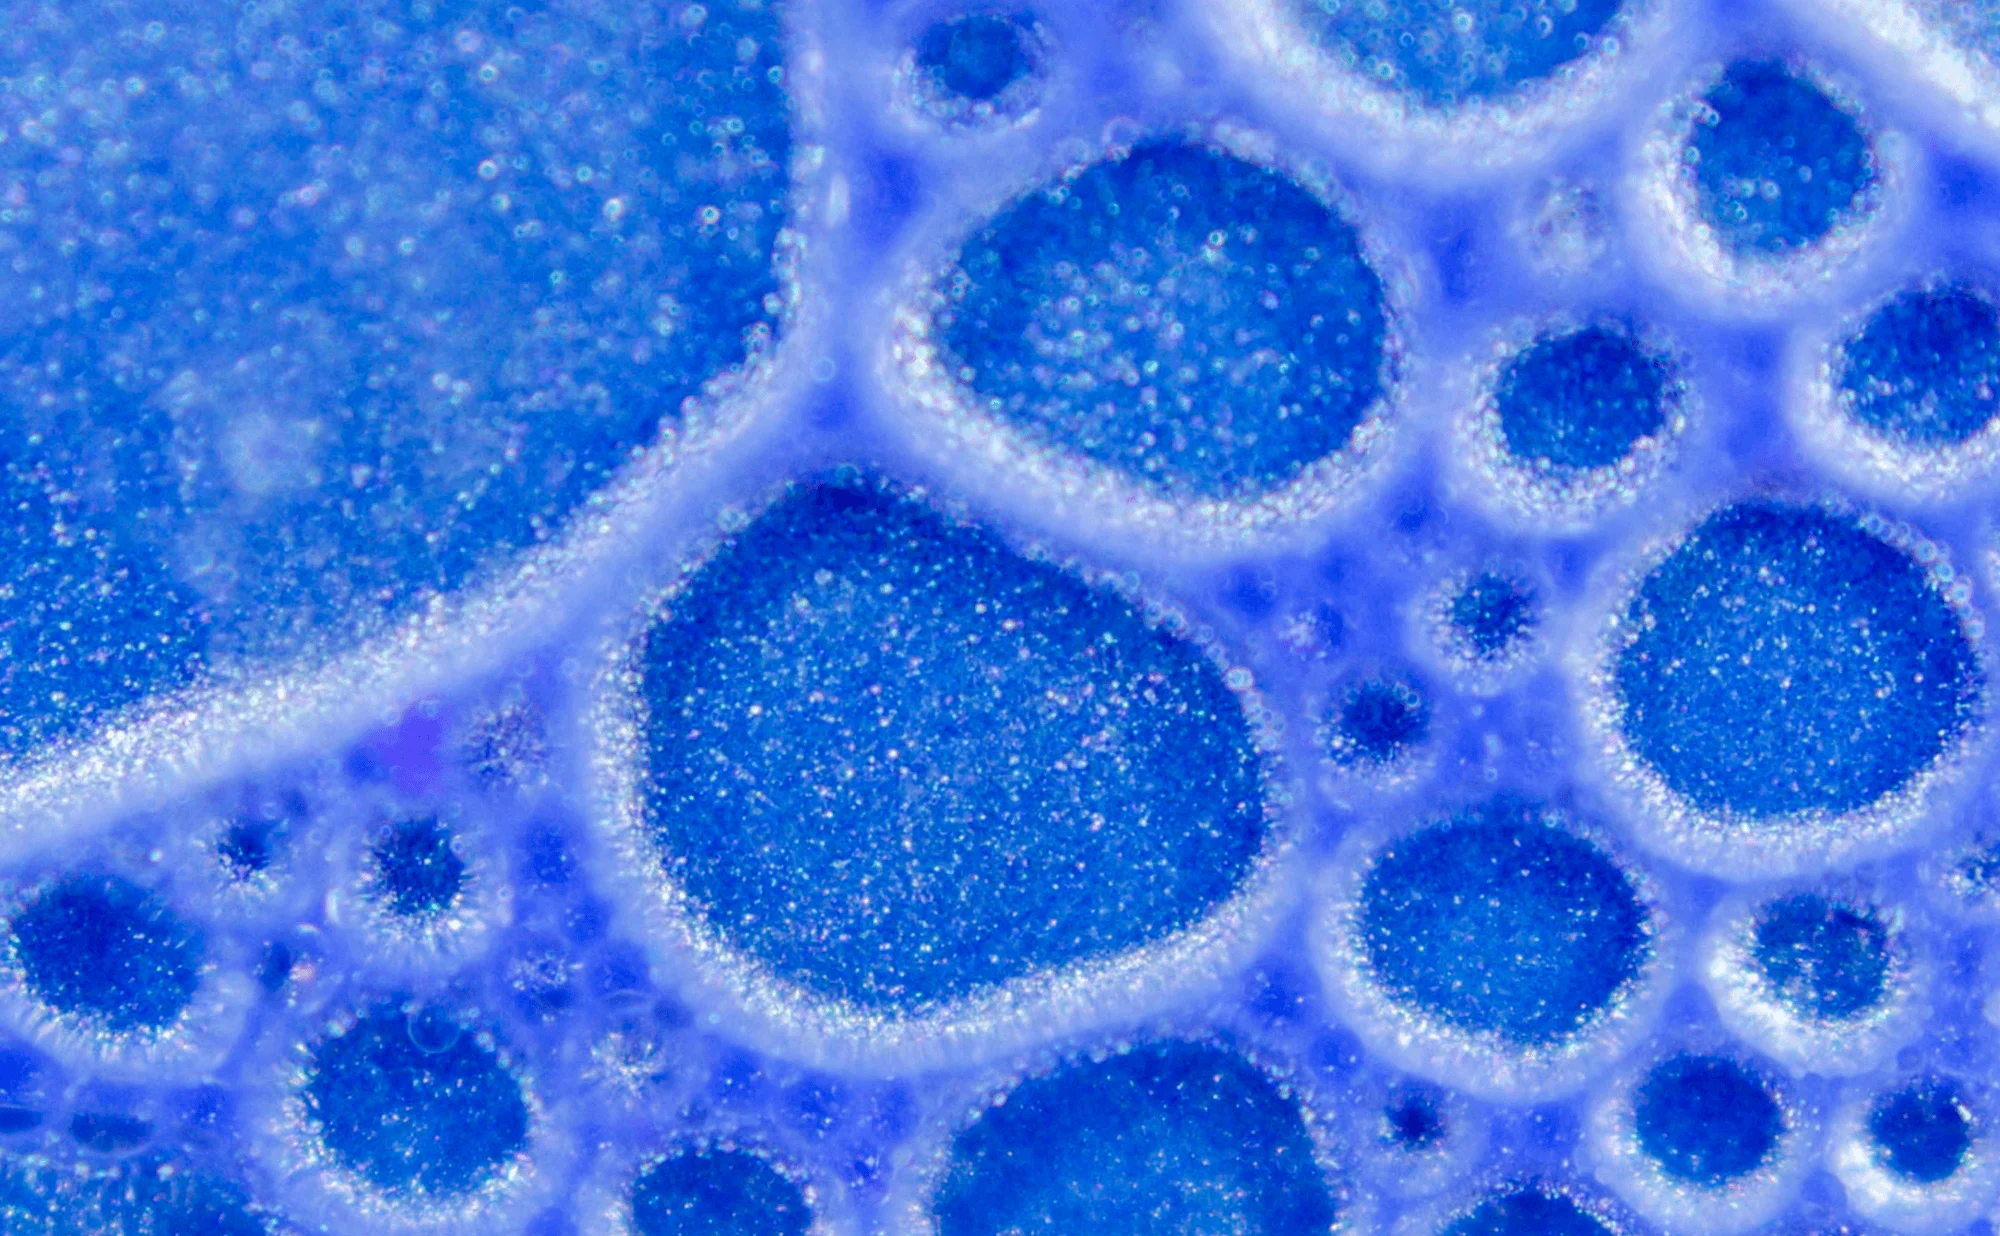 Mesh of transparent droplets in a blue-violet pigment environment. Photography, Microfluidic poetry | Julien Ridouard in collaboration with Elveflow